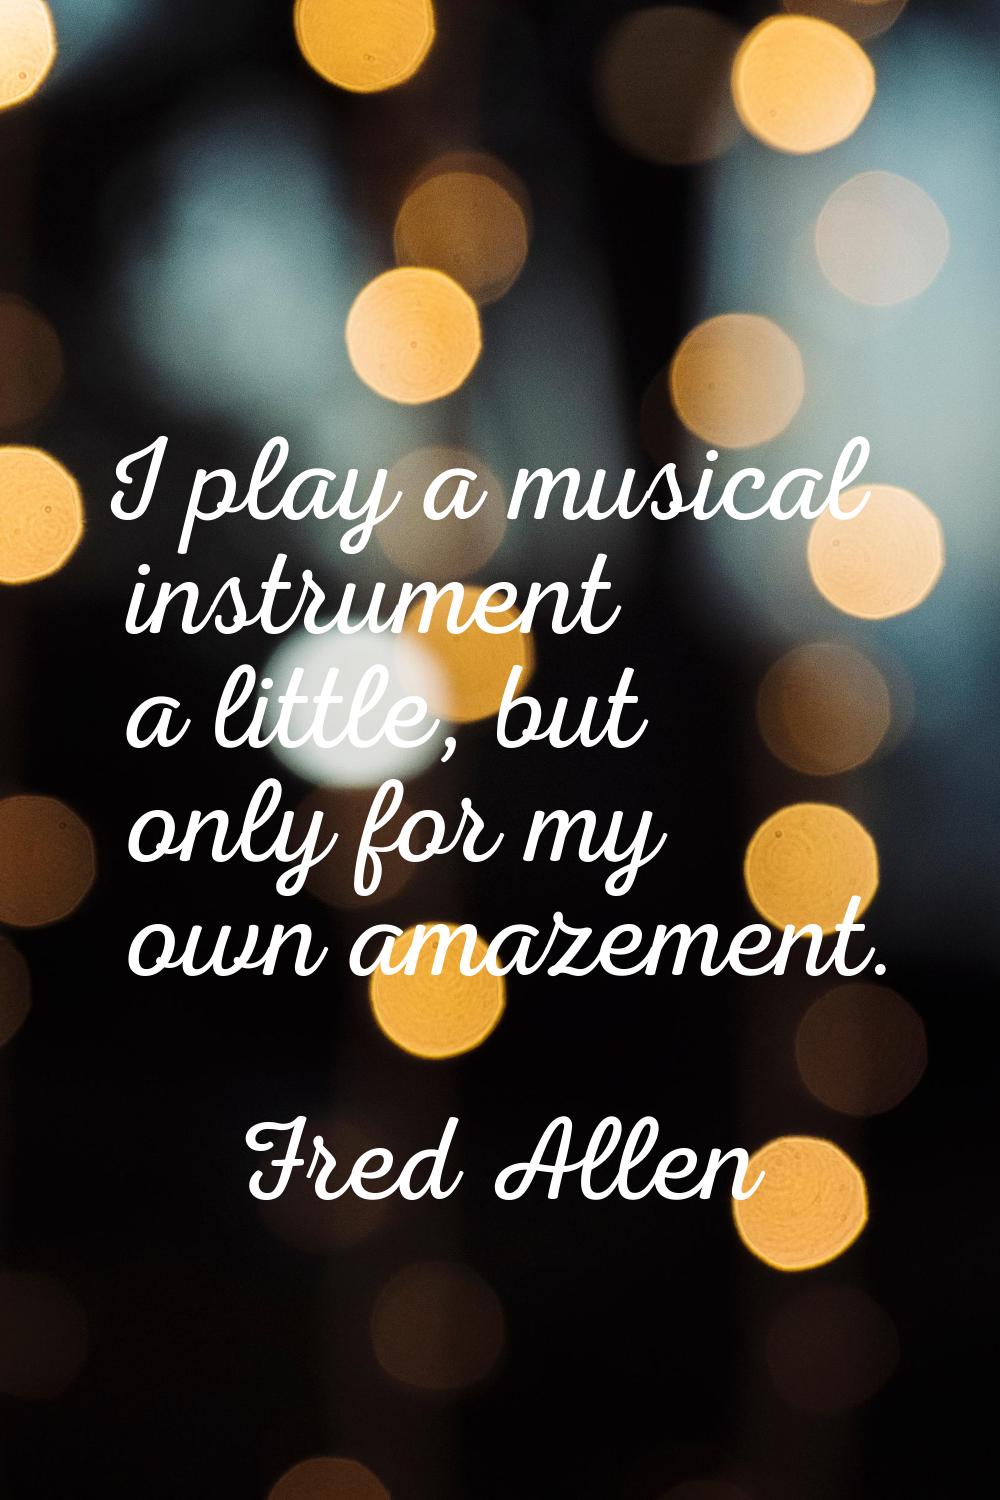 I play a musical instrument a little, but only for my own amazement.